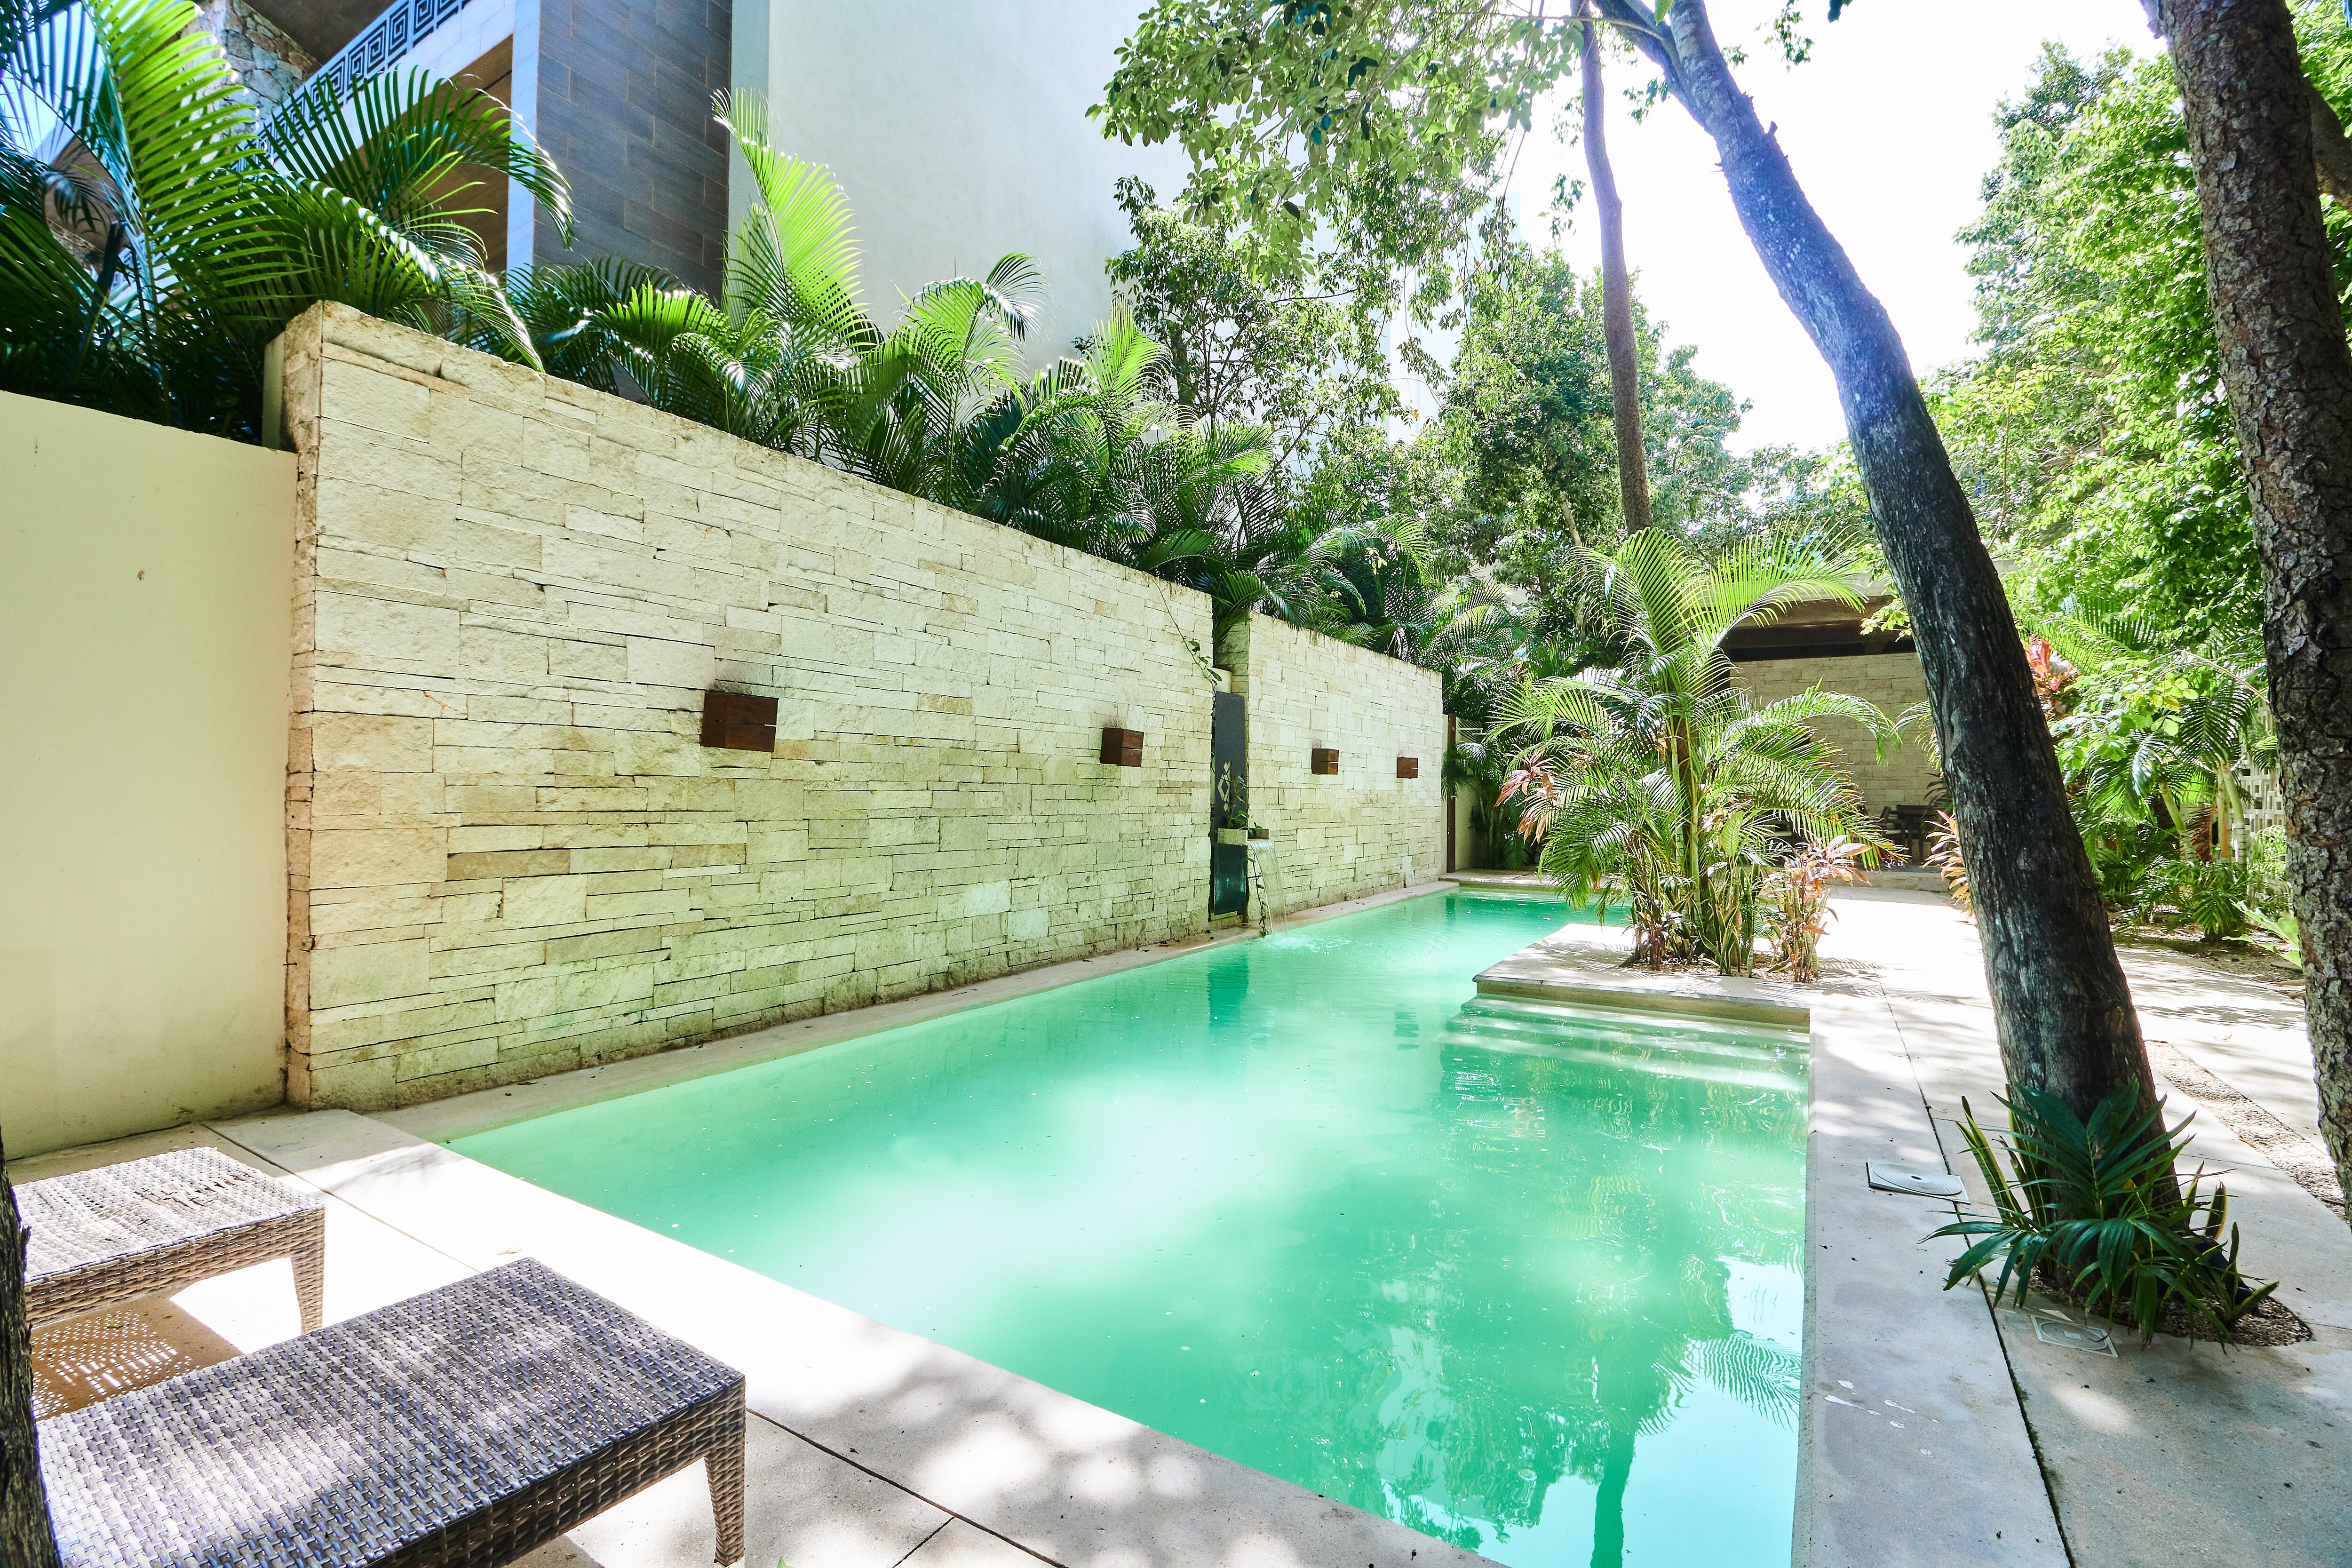 Property Image 1 - Tropical Stylish Apartment | In Tulum | Swimming Pool, Patio, Sun Loungers & Nice Seating Area